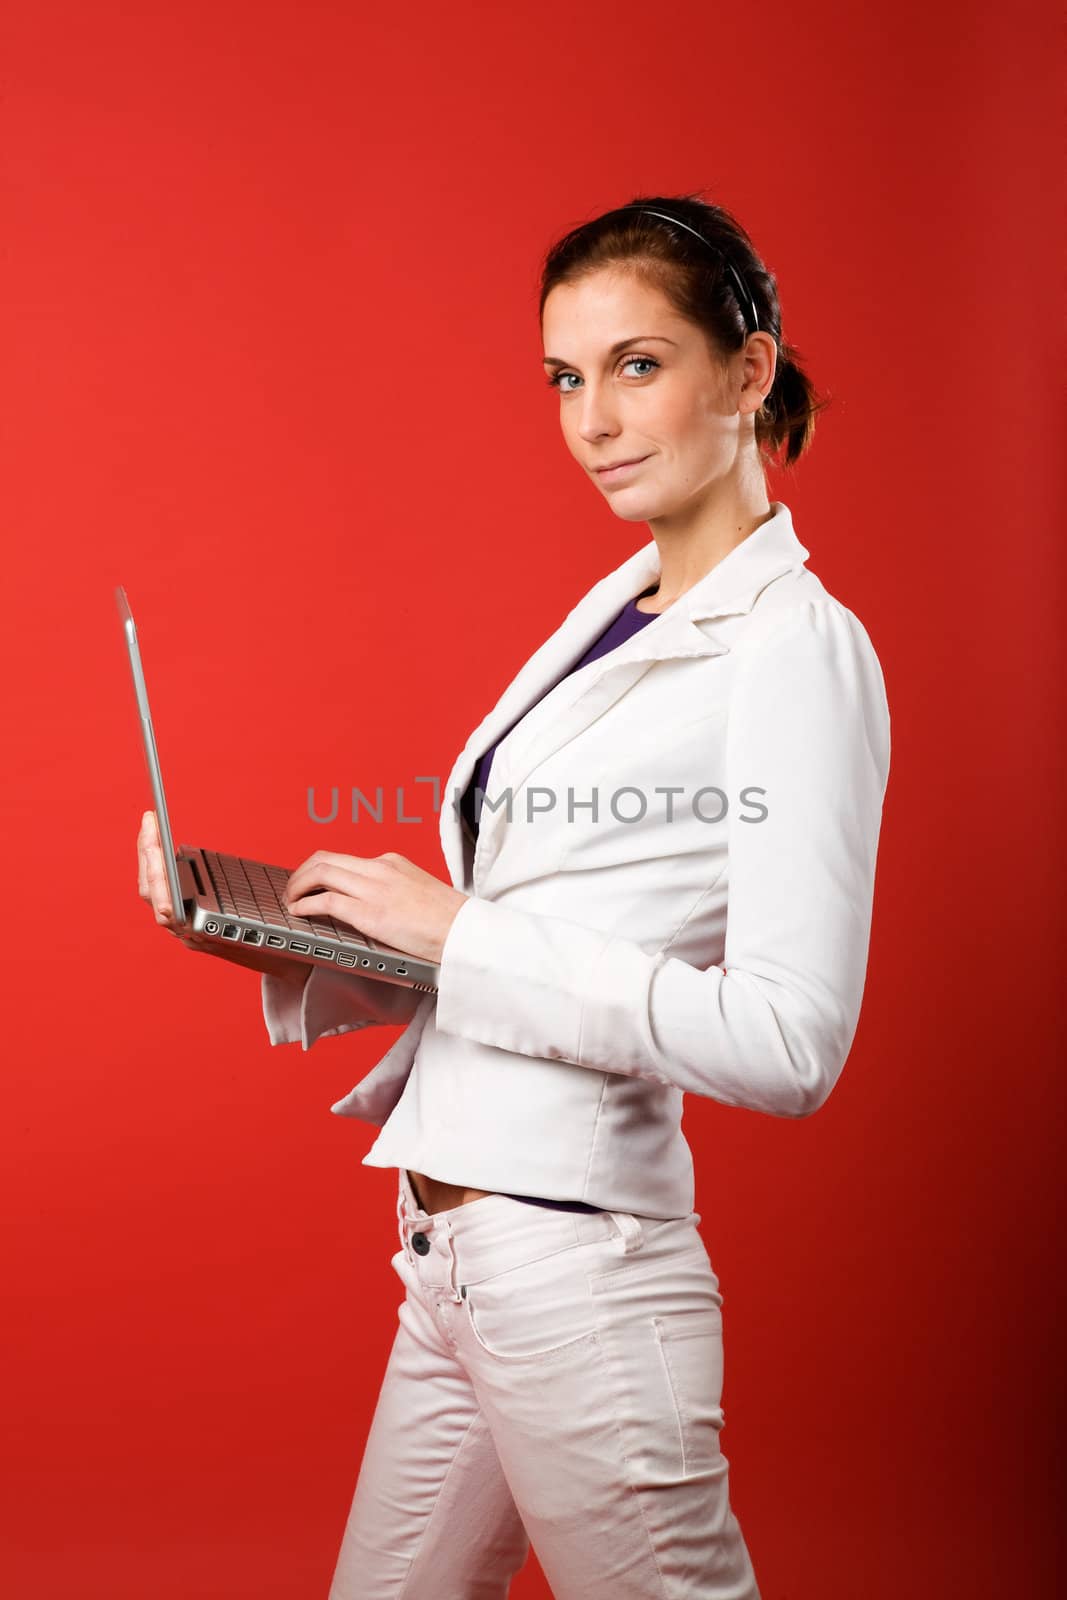 A young woman typing on a laptop computer isolated on red